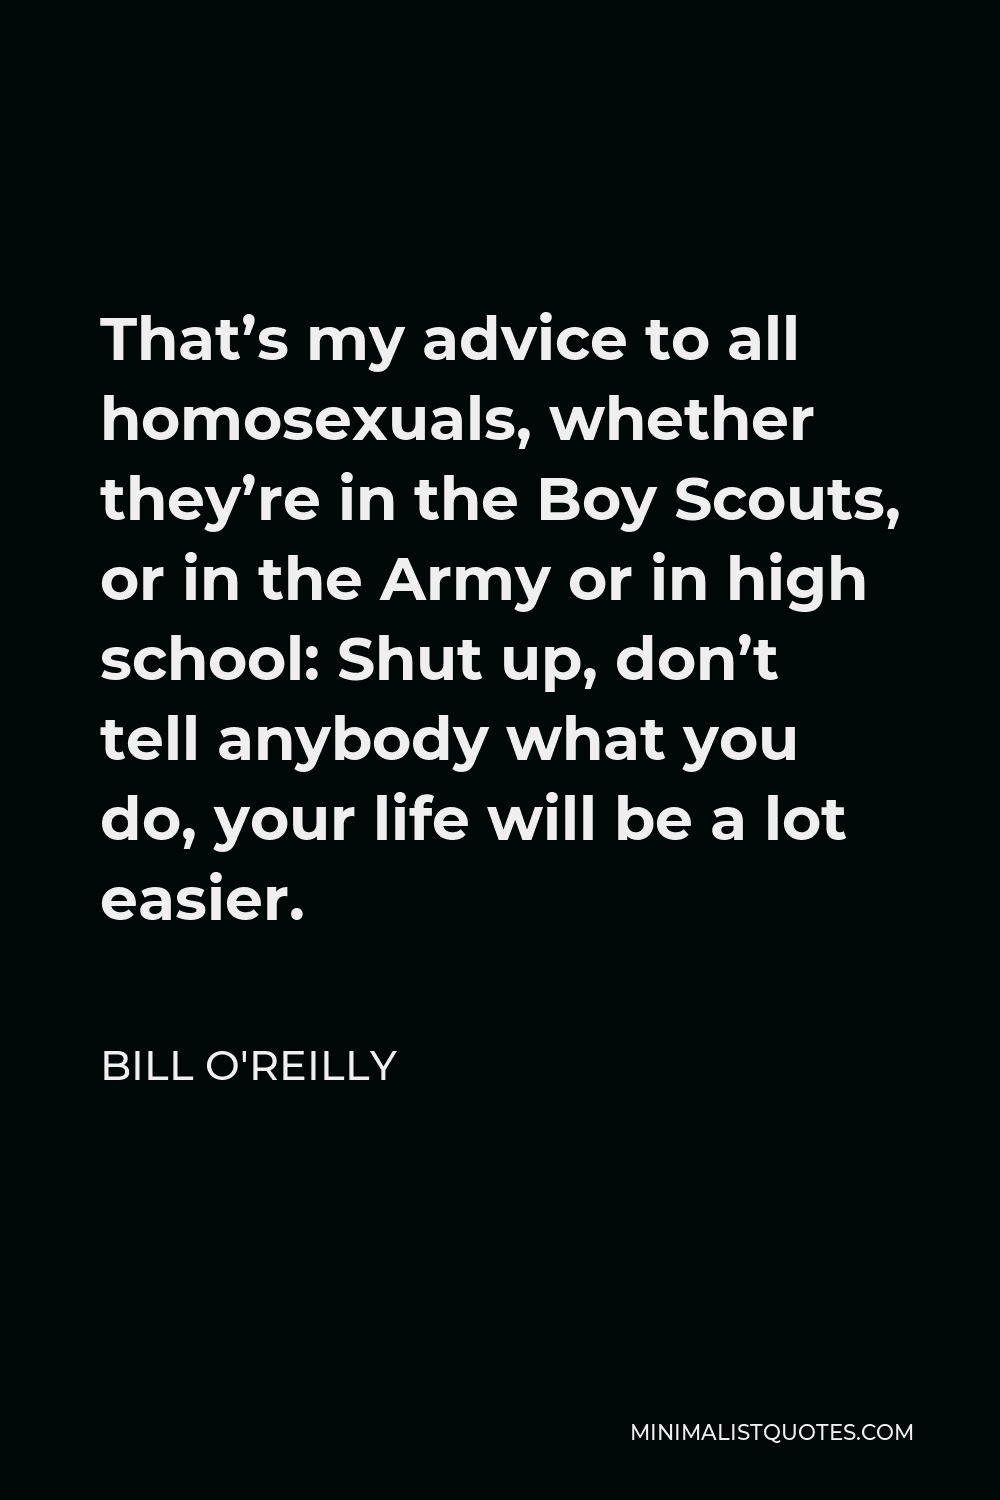 Bill O'Reilly Quote - That’s my advice to all homosexuals, whether they’re in the Boy Scouts, or in the Army or in high school: Shut up, don’t tell anybody what you do, your life will be a lot easier.